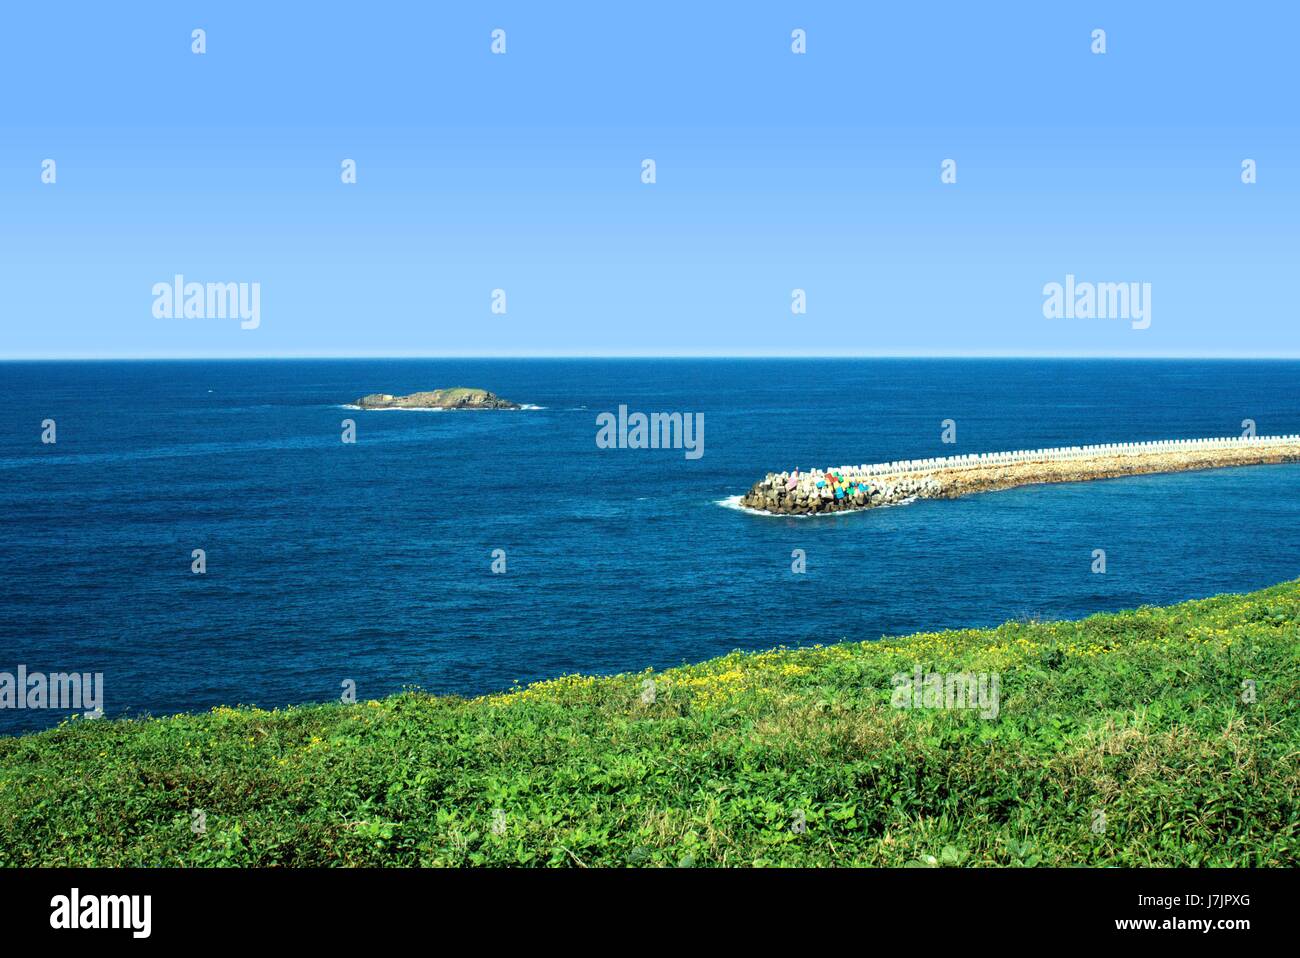 Clear blue sky on the top, then blue sea water and green plants at the bottom. Far off in the sea is a breakwater and an island. Australian landscape. Stock Photo